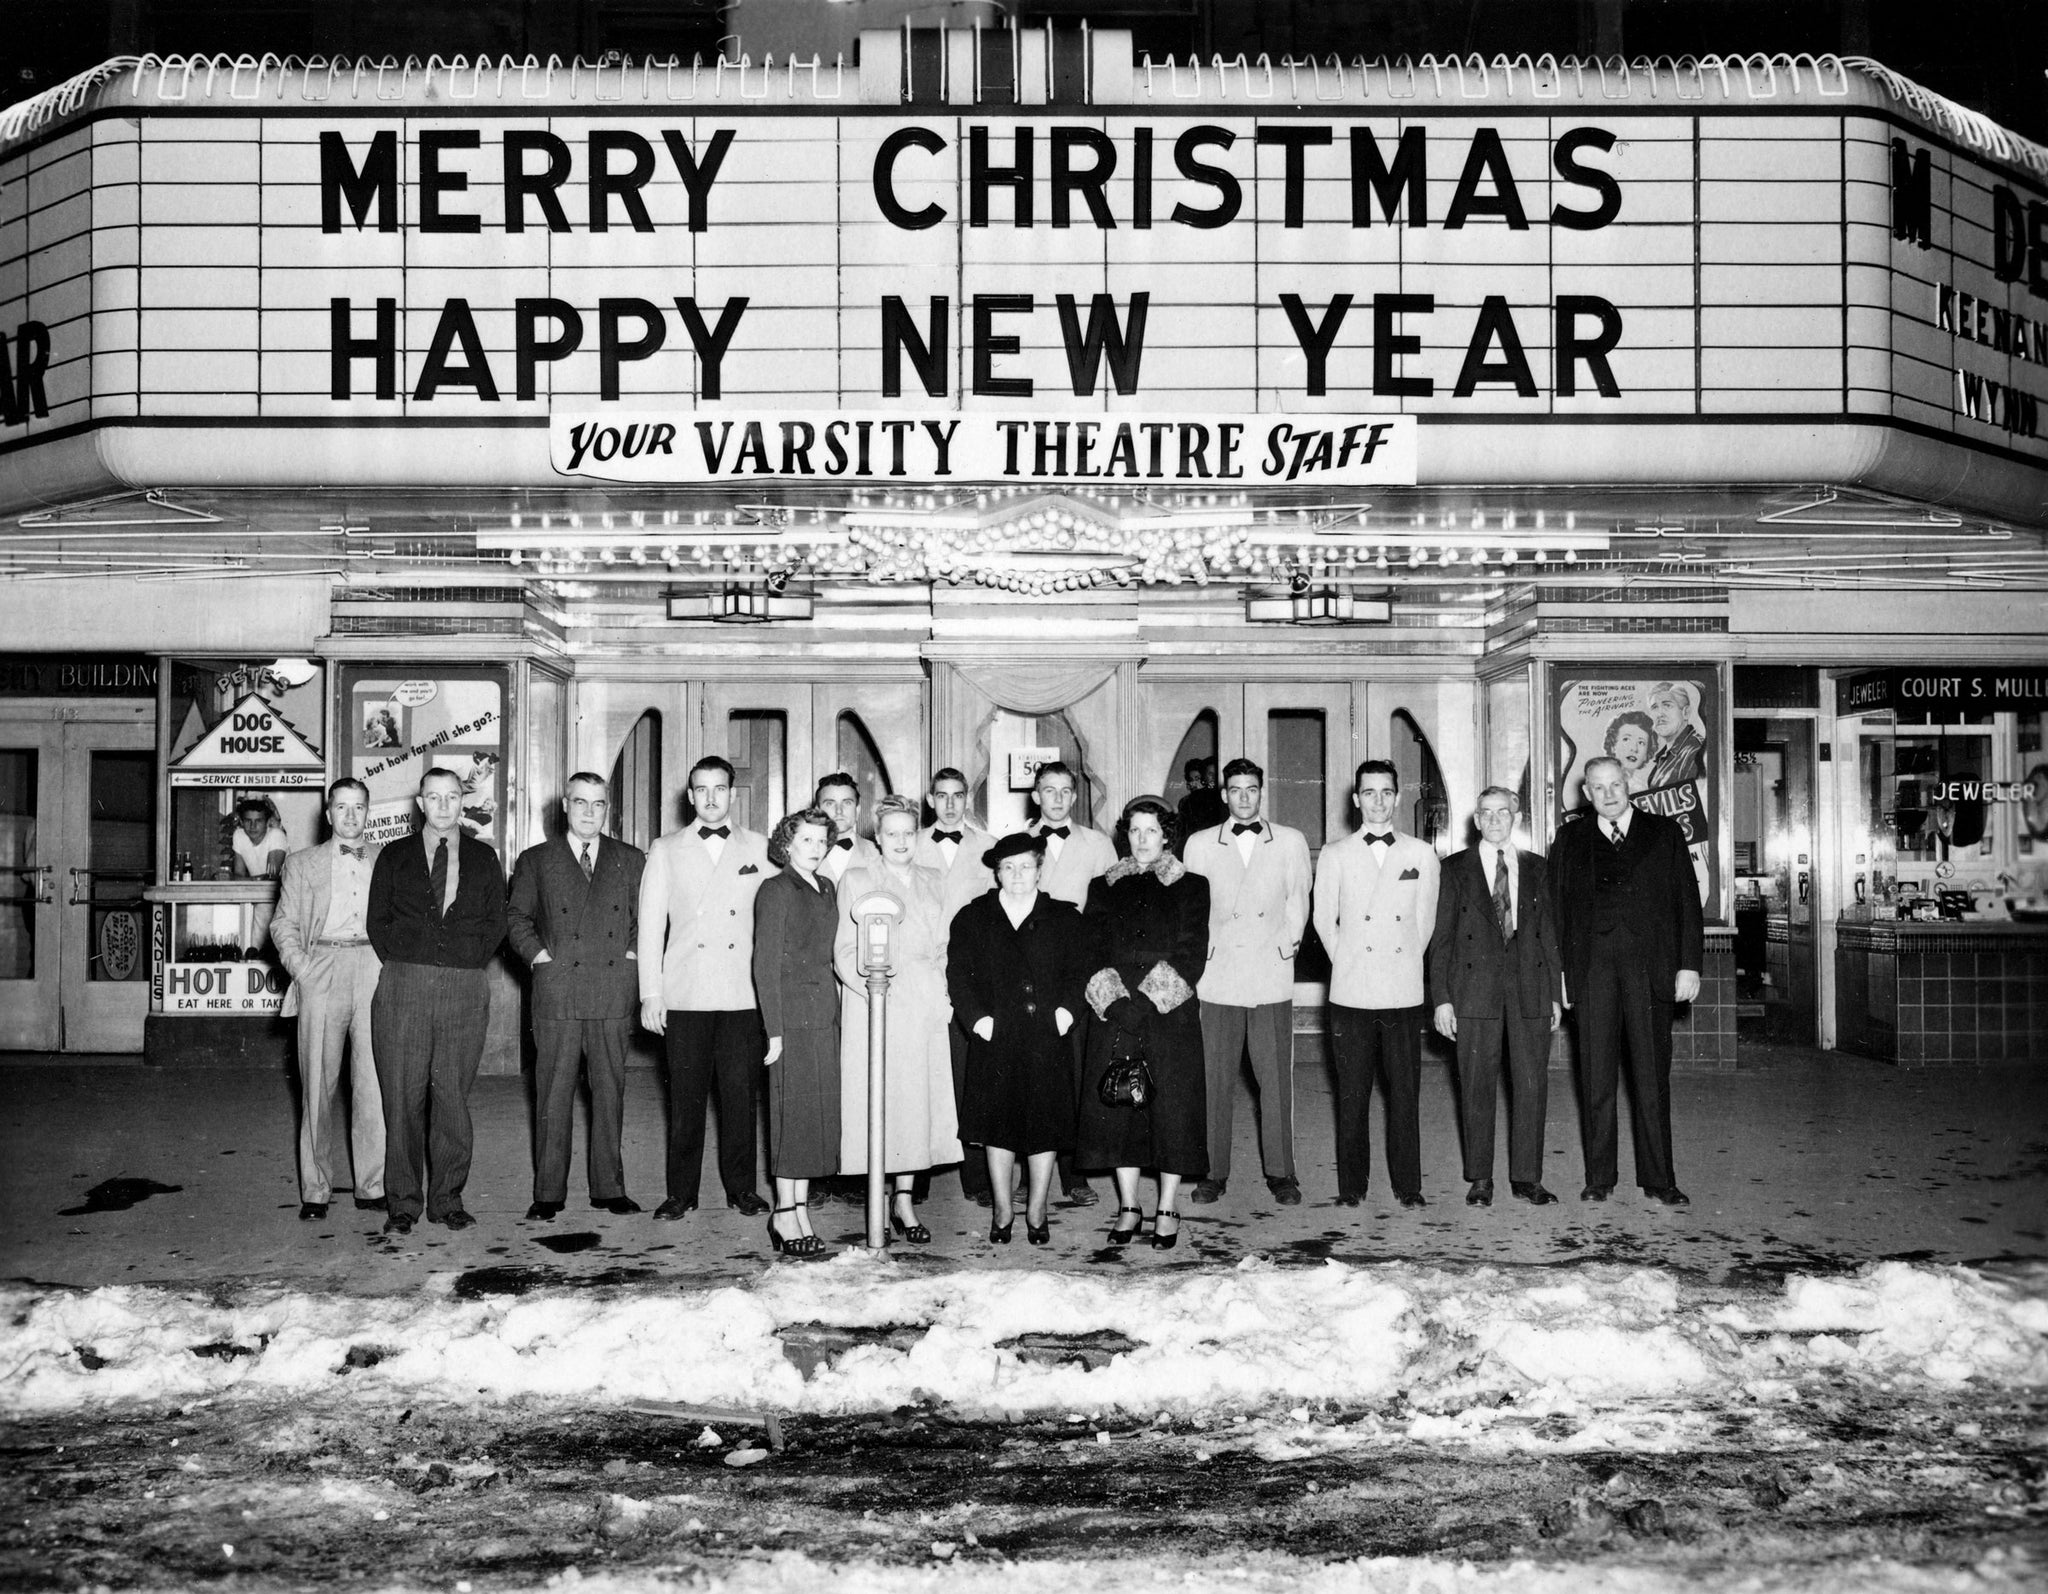 The Varsity Theatre’s staff Christmas photo, November 26, 1948. The theater was located at 143 North 13th Street. -- NEBRASKA STATE HISTORICAL SOCIETY / #RG2183.PH001948-001126